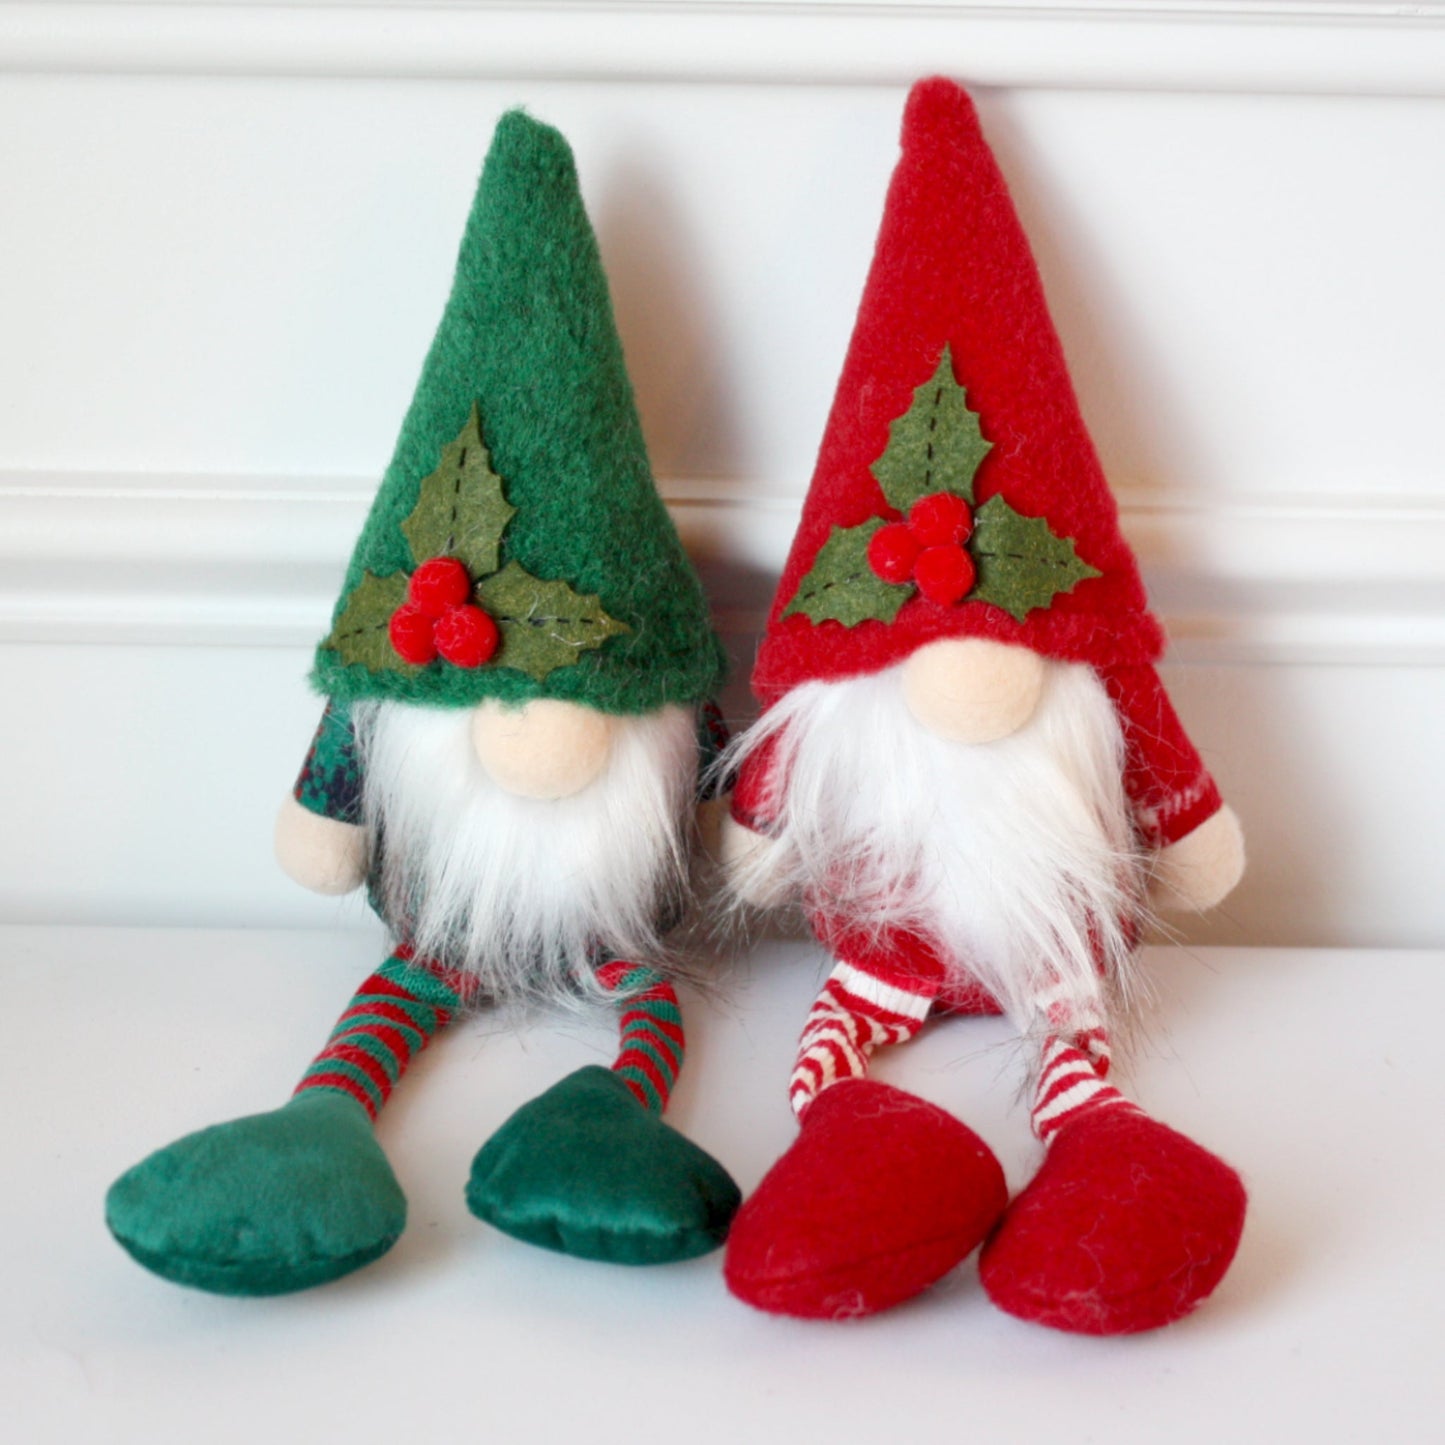 Pair of Handmade Christmas Gnome Brothers - Made in the USA